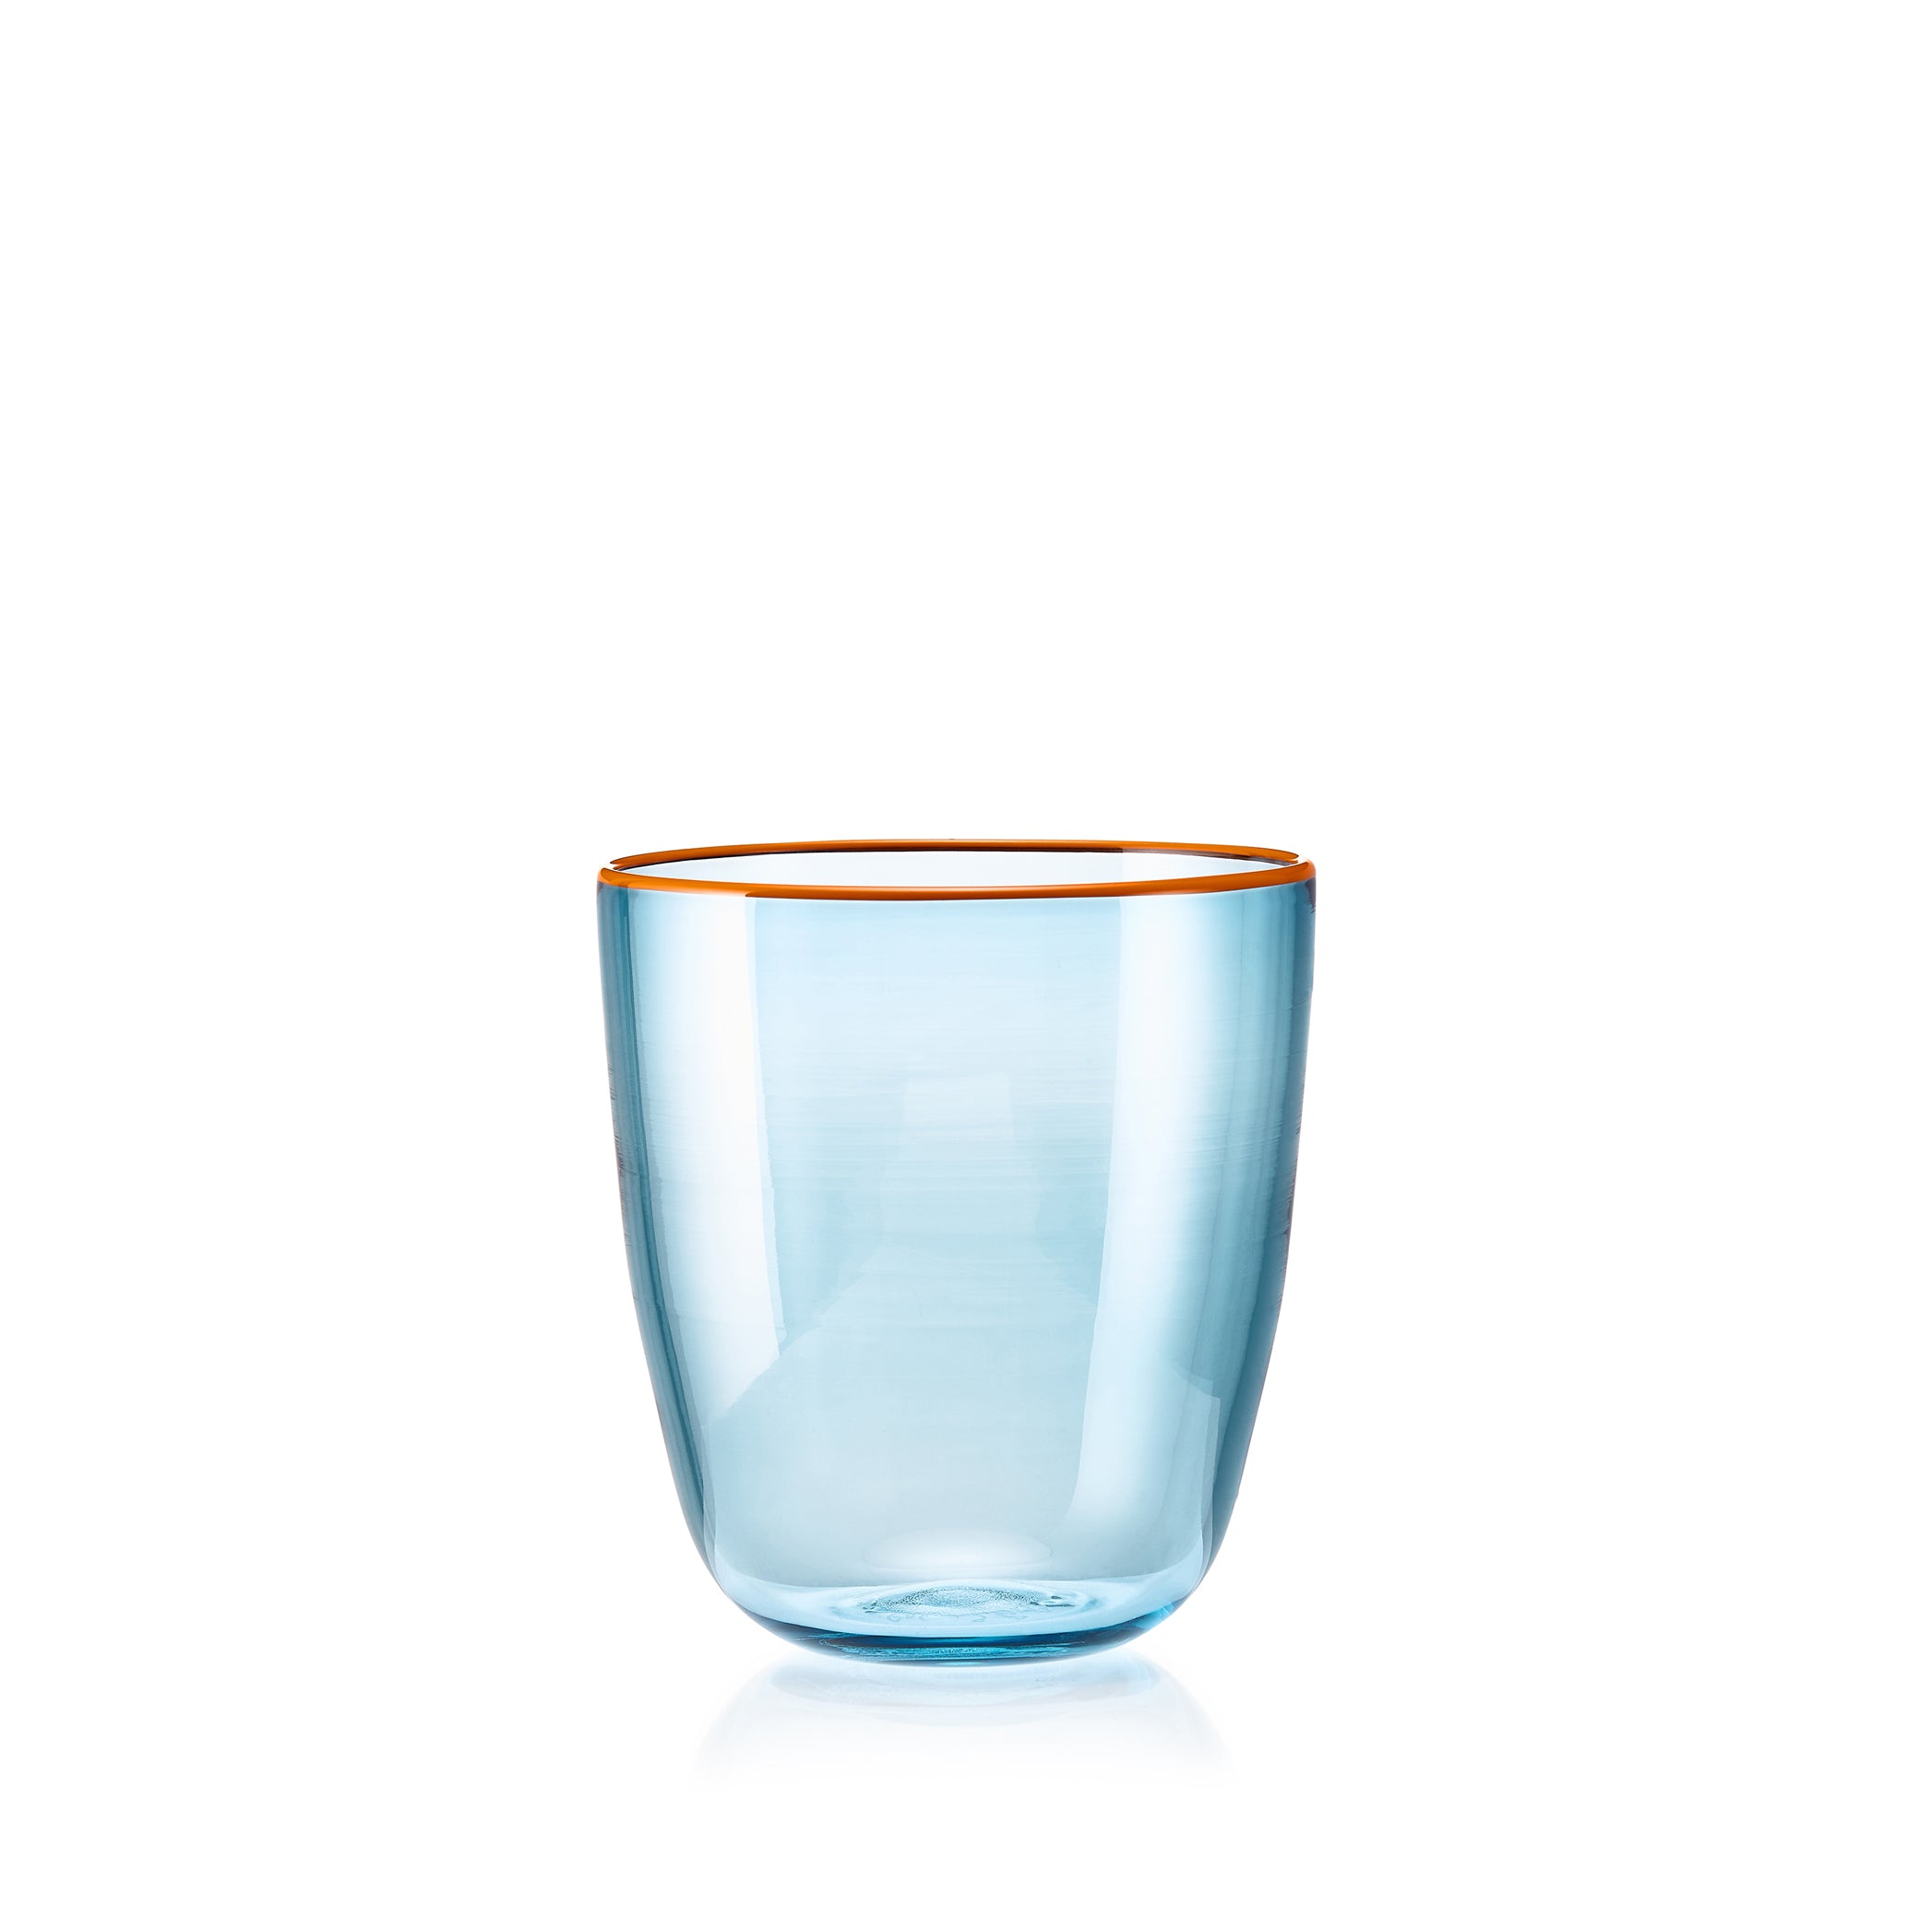 Handblown Bumba Glass in Turquoise with Orange Rim, 30cl